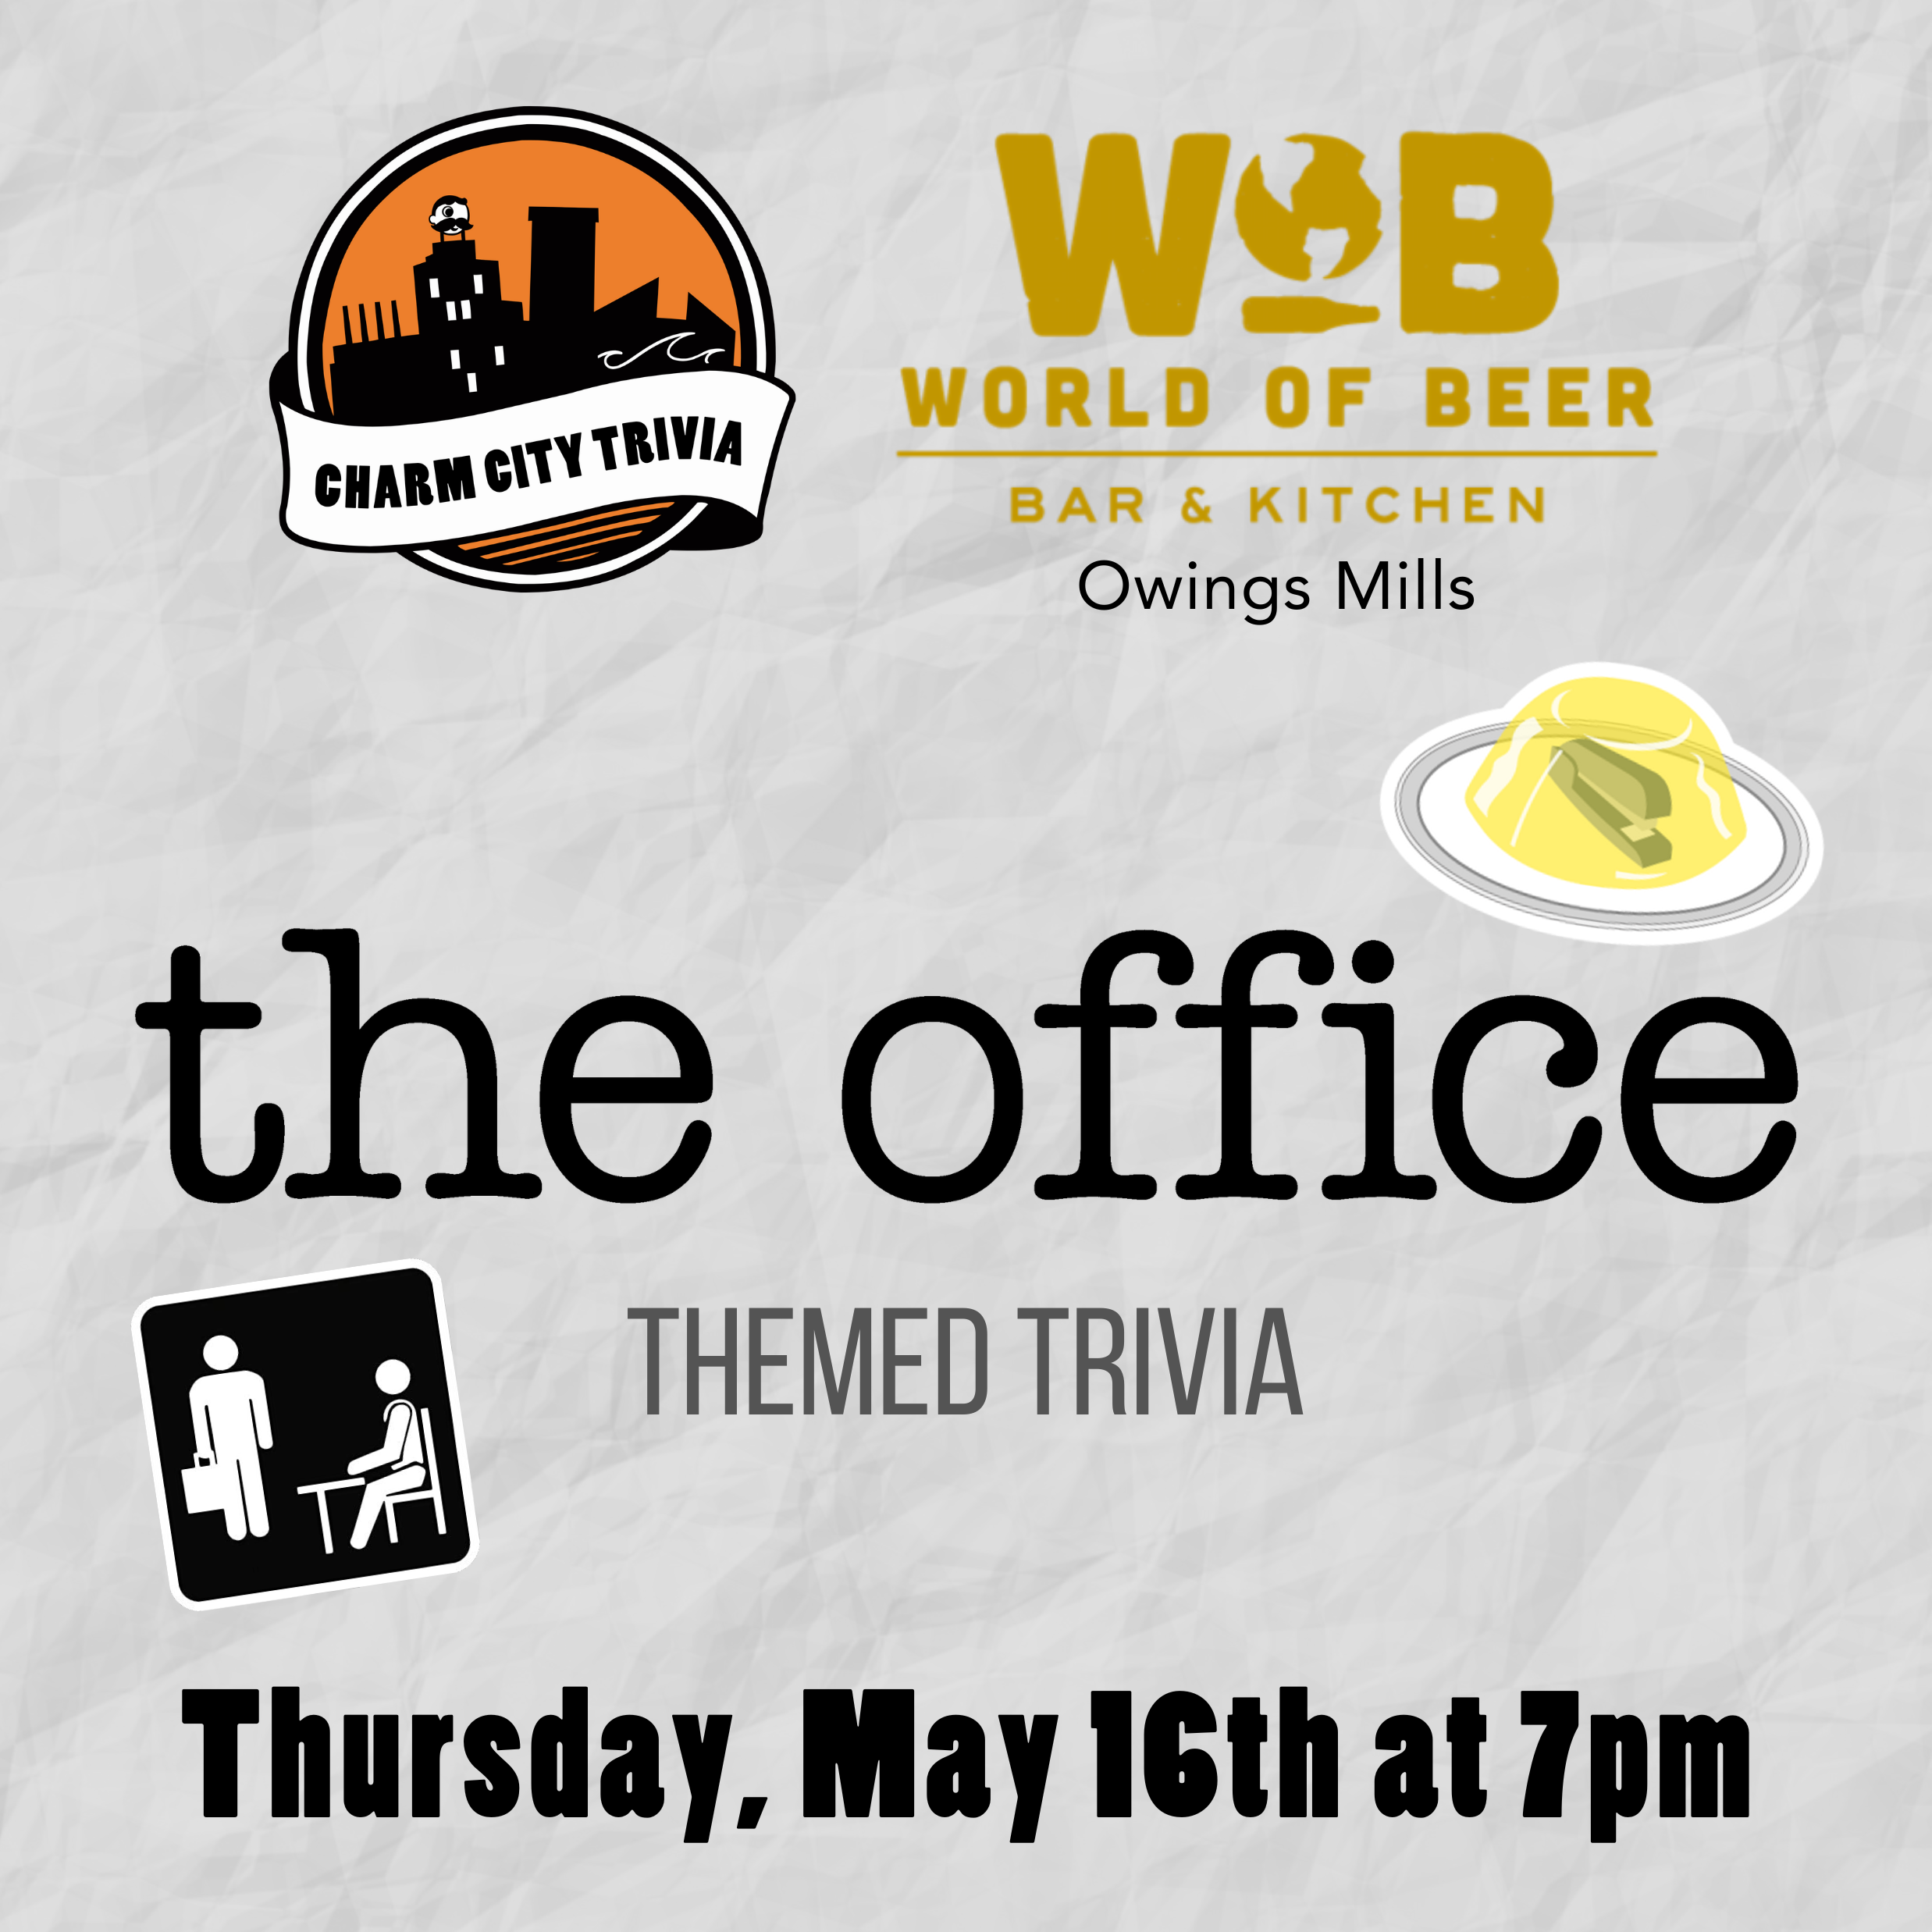 a light gray, paper textured background with the charm city trivia logo, world of beer owings mills logo, the office logo, a stapler in jello, the office placard, and black text. the text reads: thursday, may 16th at 7pm